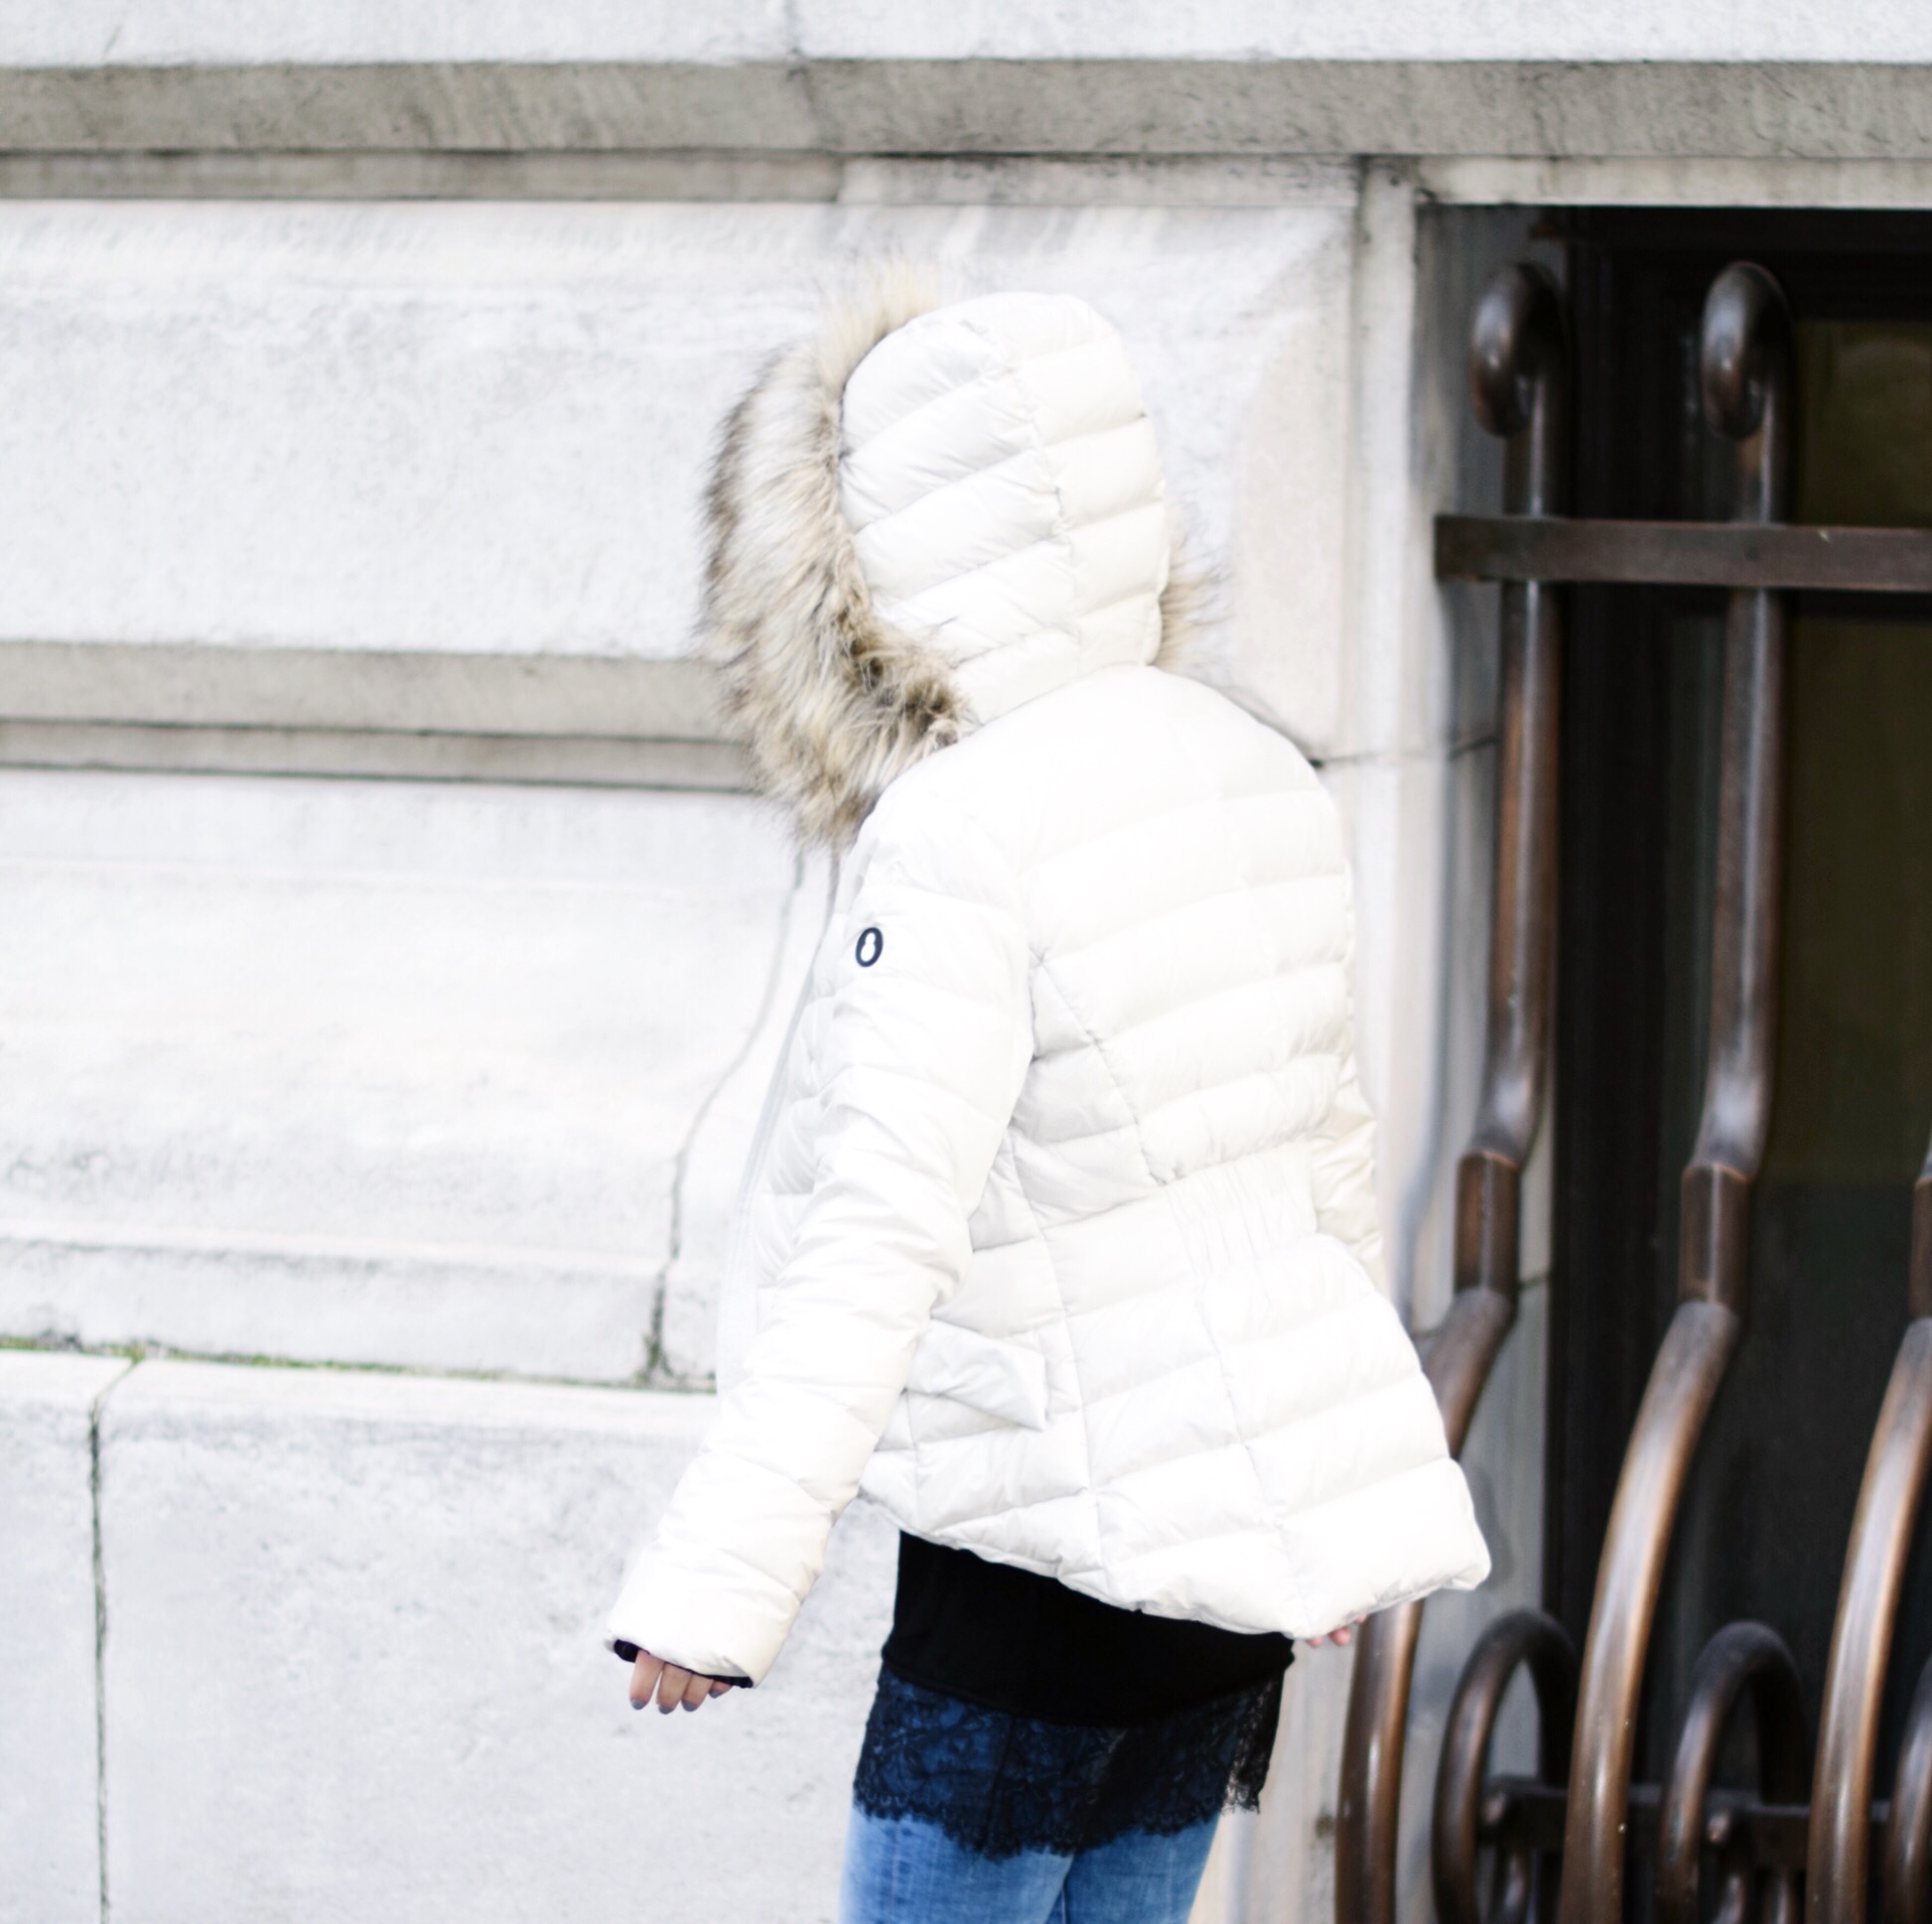 White Hi-Low Puffer Coat Snowman New York Louboutins & Love Fashion Blog Esther Santer NYC Street Style Blogger Puffer Premium Down Jacket Outerwear Company Collab Faux-Fur Hood White Winter Look Beautiful Warm Photoshoot Model Discount Code Shopping.JPG